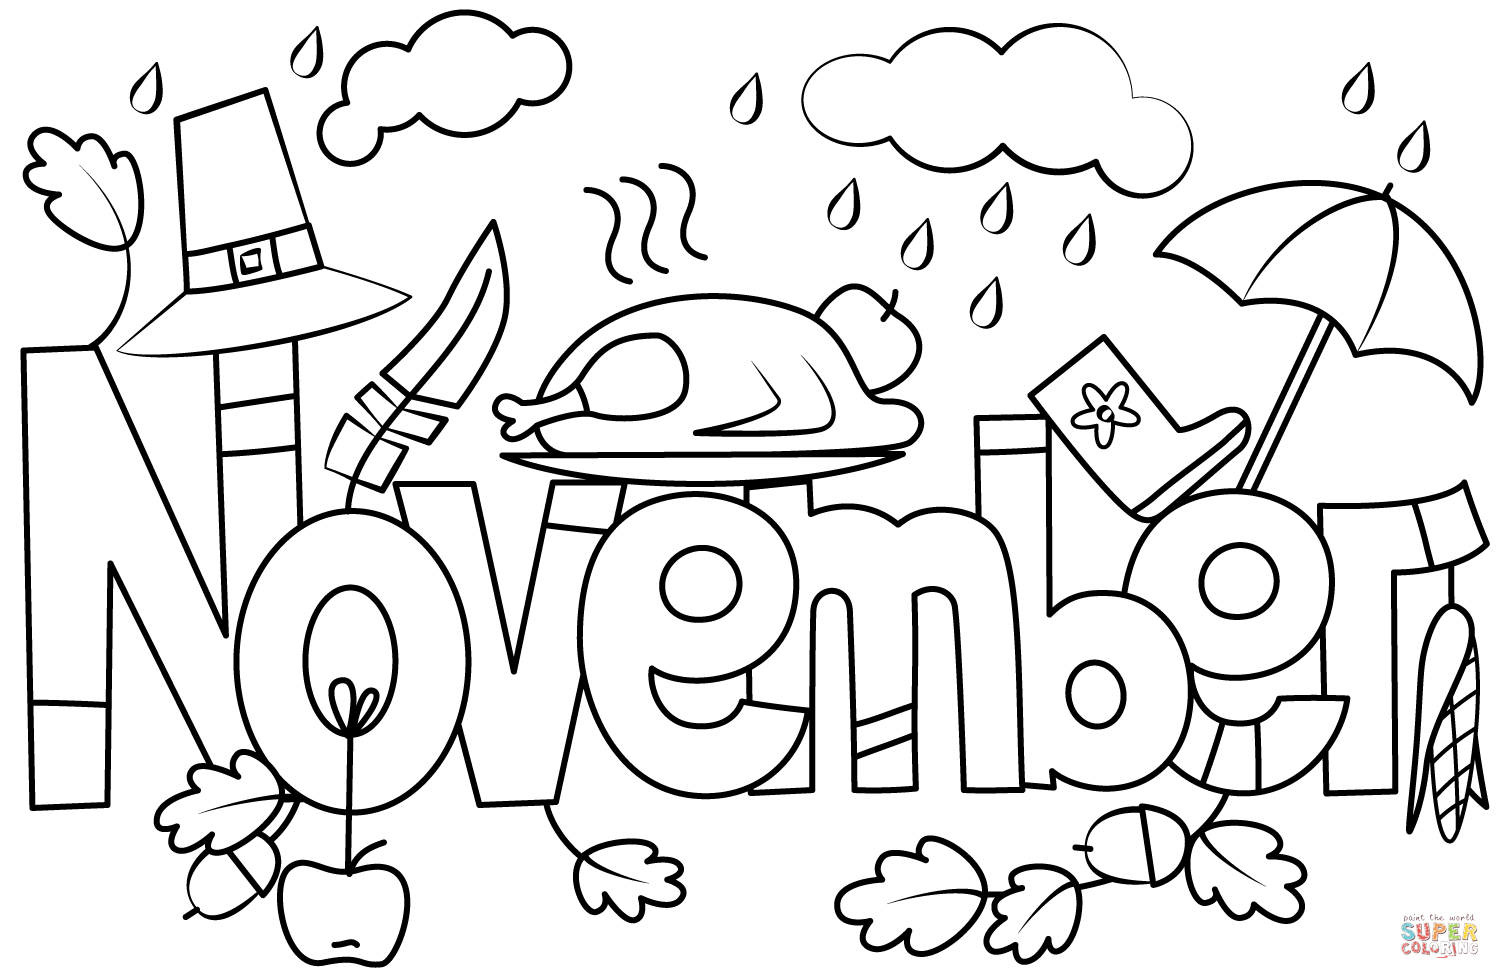 November Coloring Pages